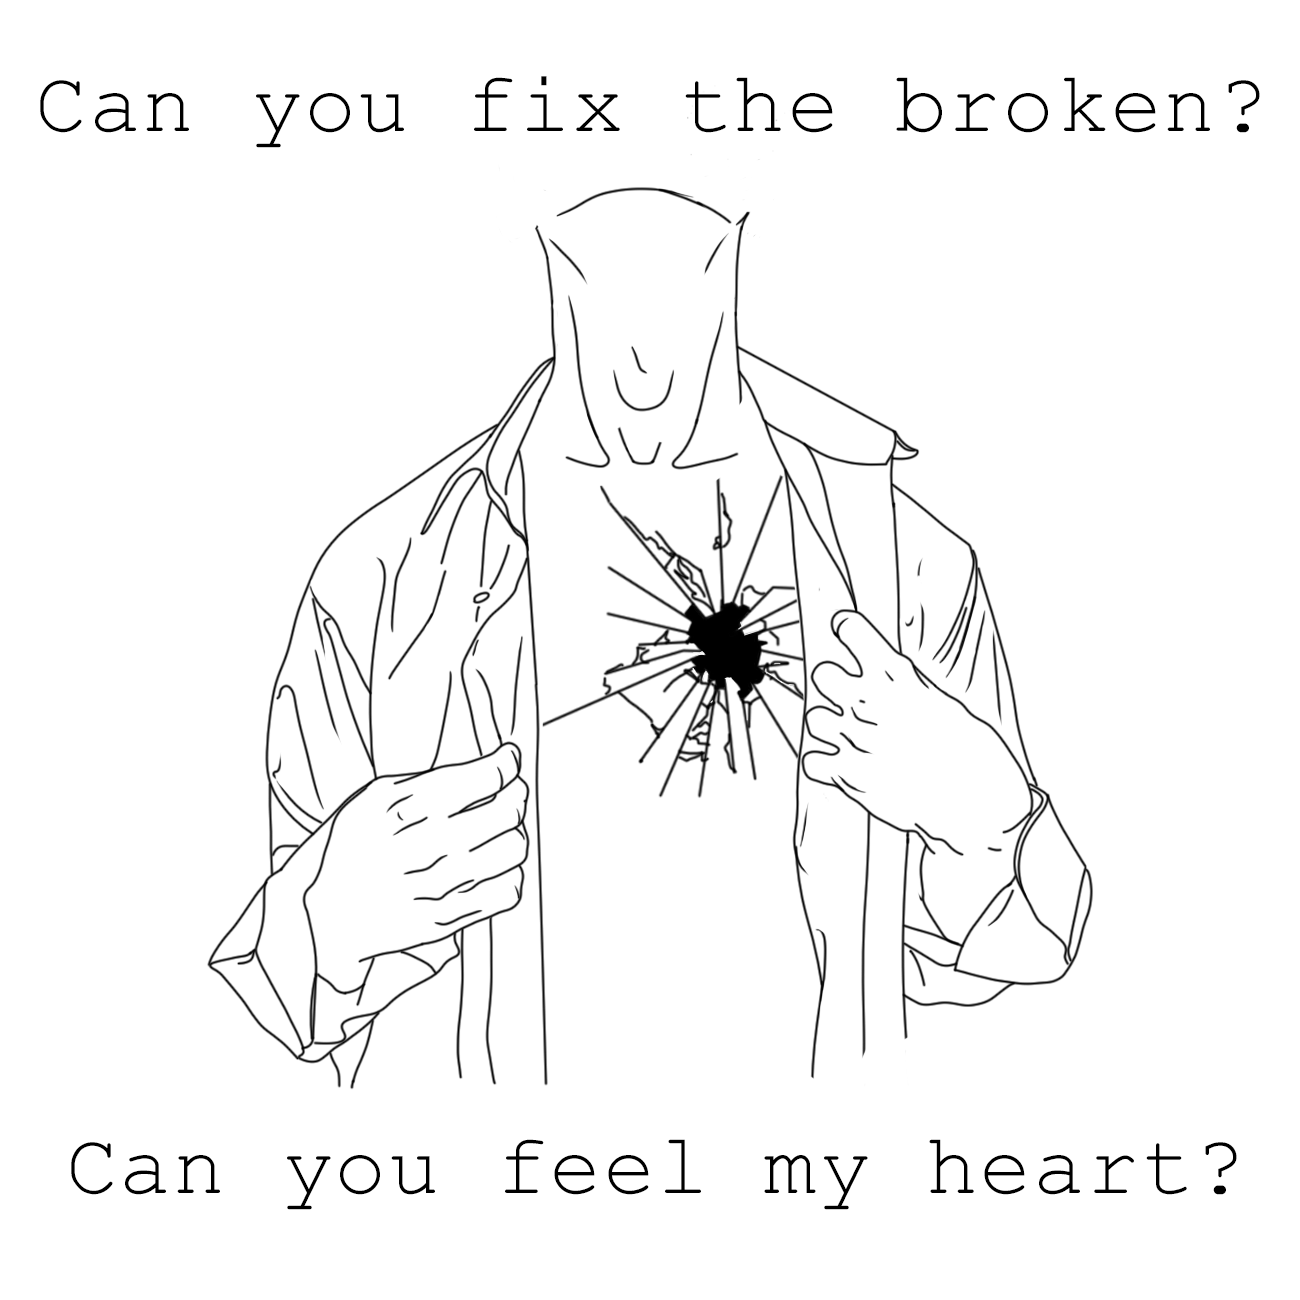 Фф can you feel my. Can you Fix the broken can you feel my Heart. Feel my Heart. Can feel my Heart. You feel my Heart.